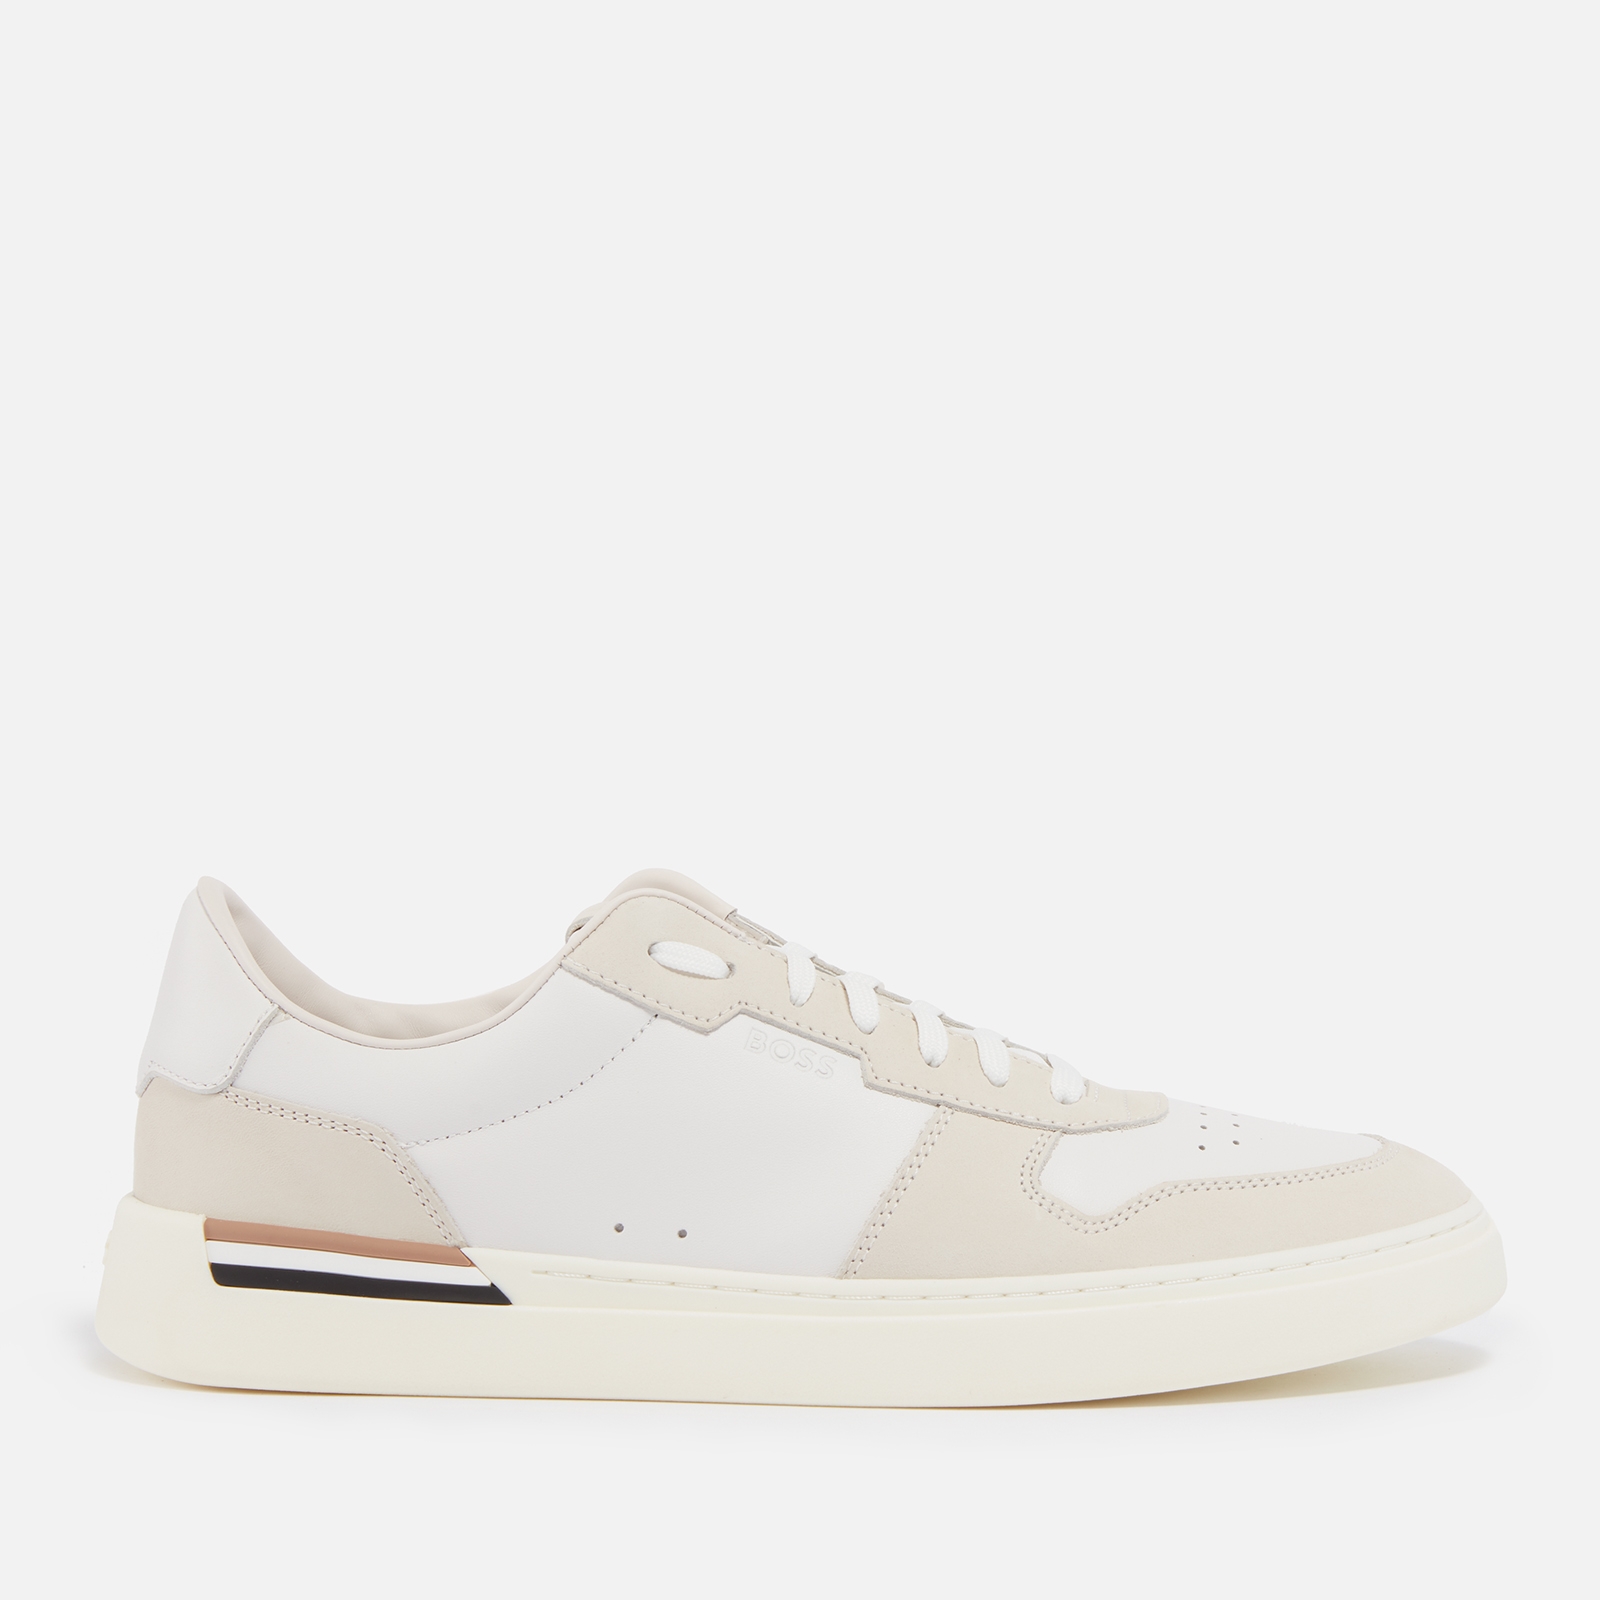 BOSS Men’s Clint Leather Suede Tennis Trainers